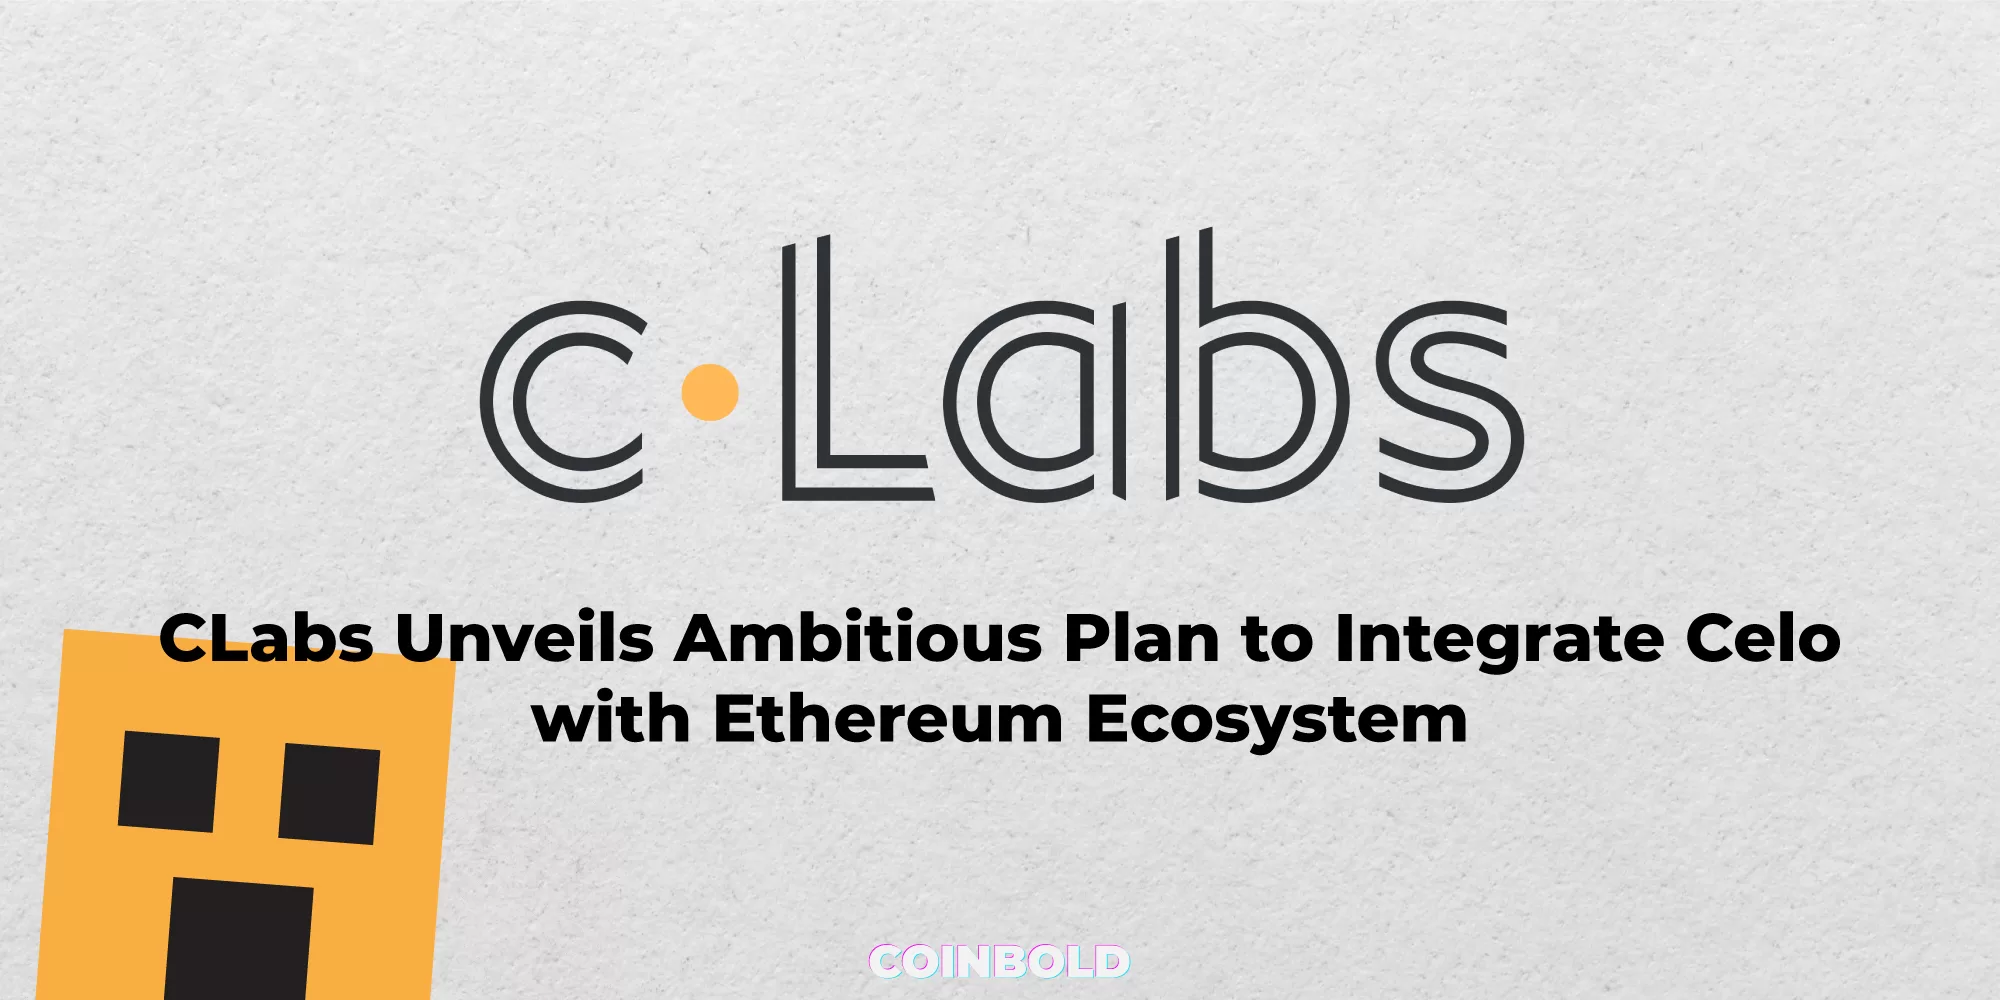 CLabs Unveils Ambitious Plan to Integrate Celo with Ethereum Ecosystem jpg